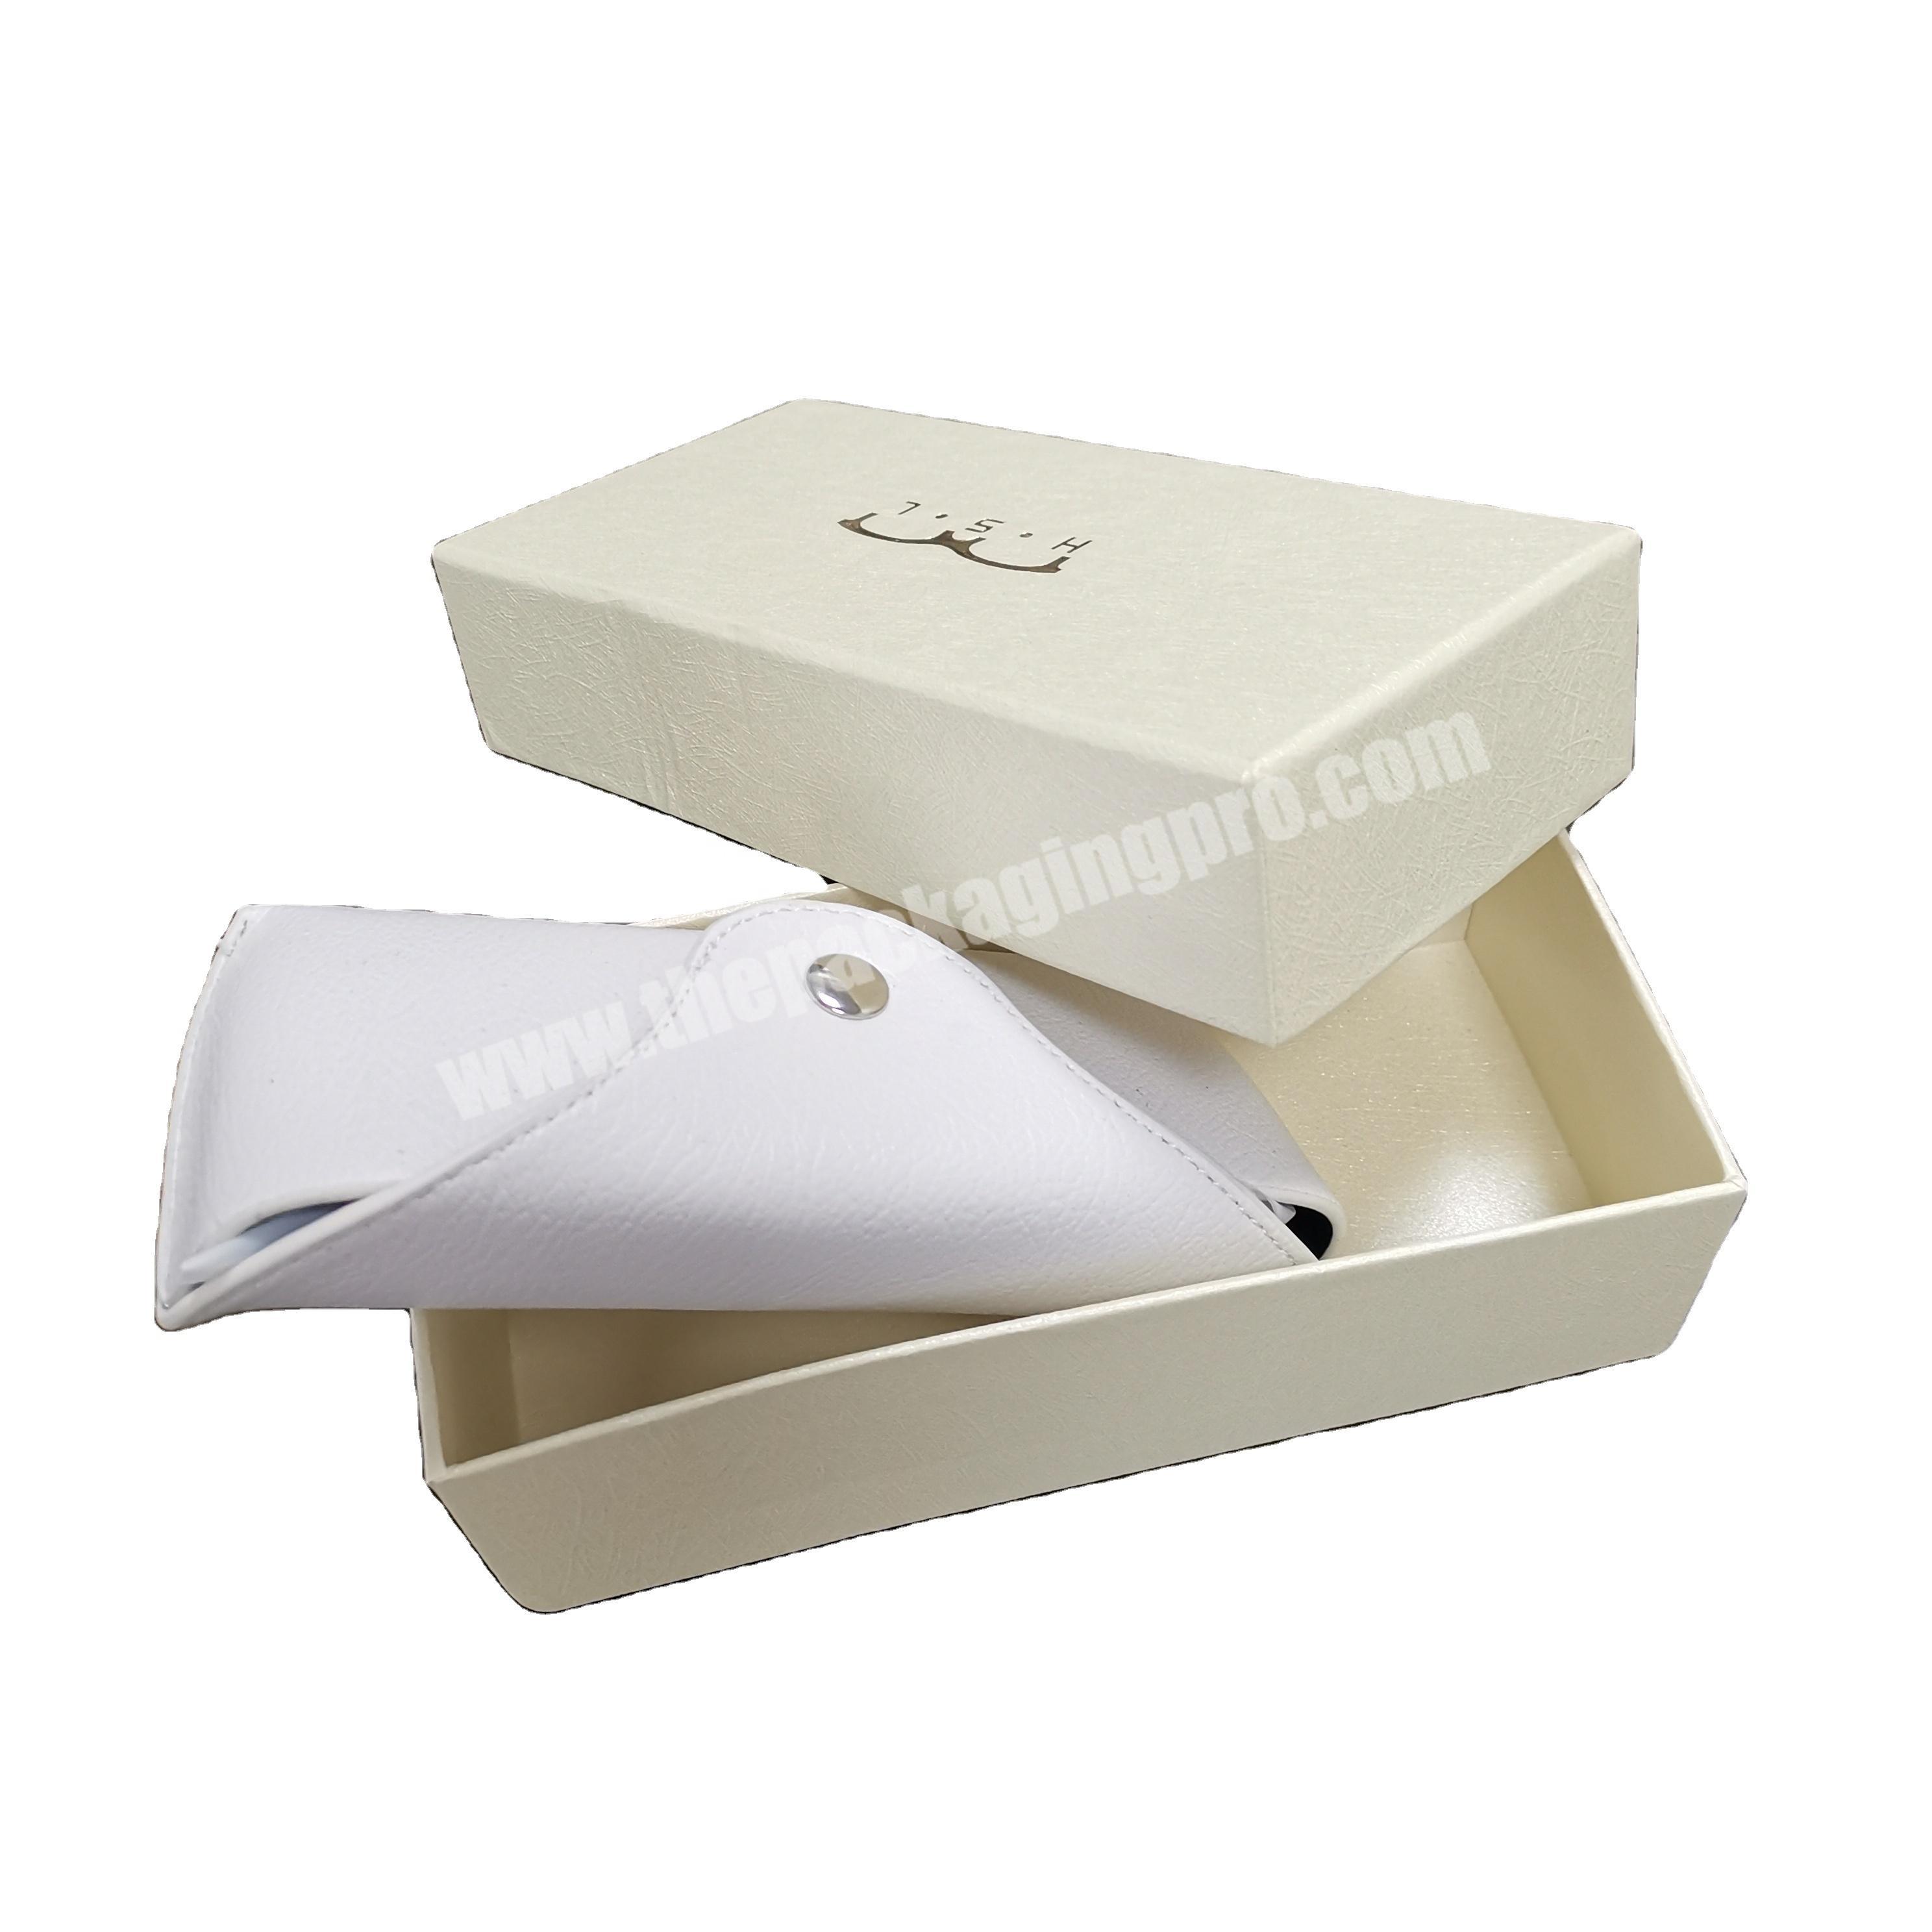 Custom Sunglasses Box Packaging with branded printed logo